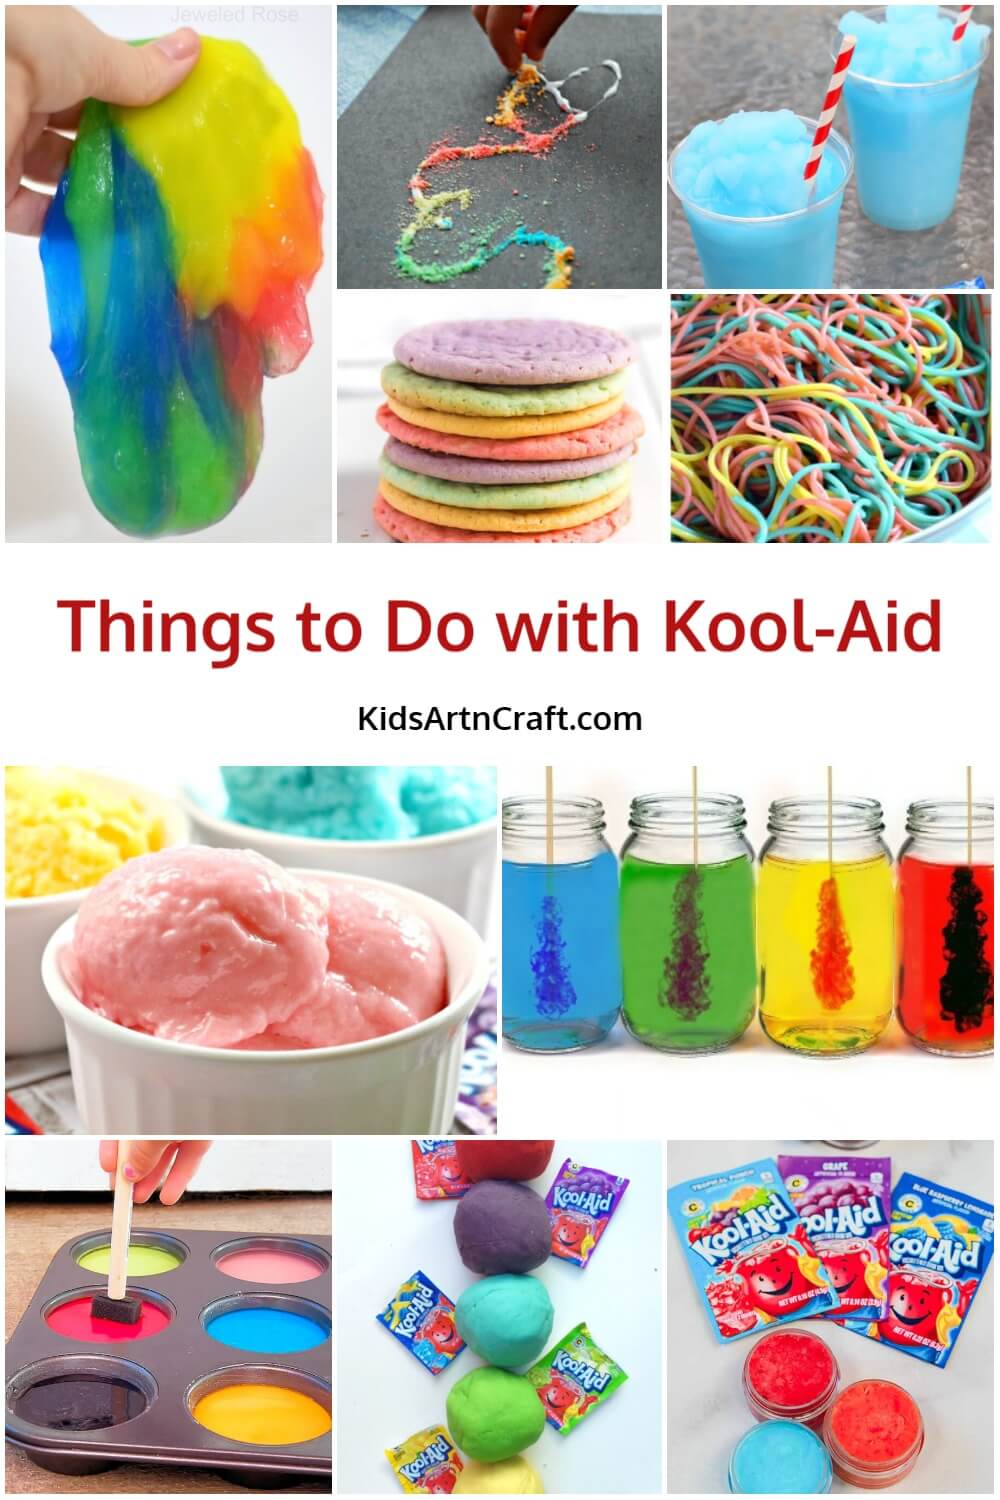 Things to Do with Kool-Aid